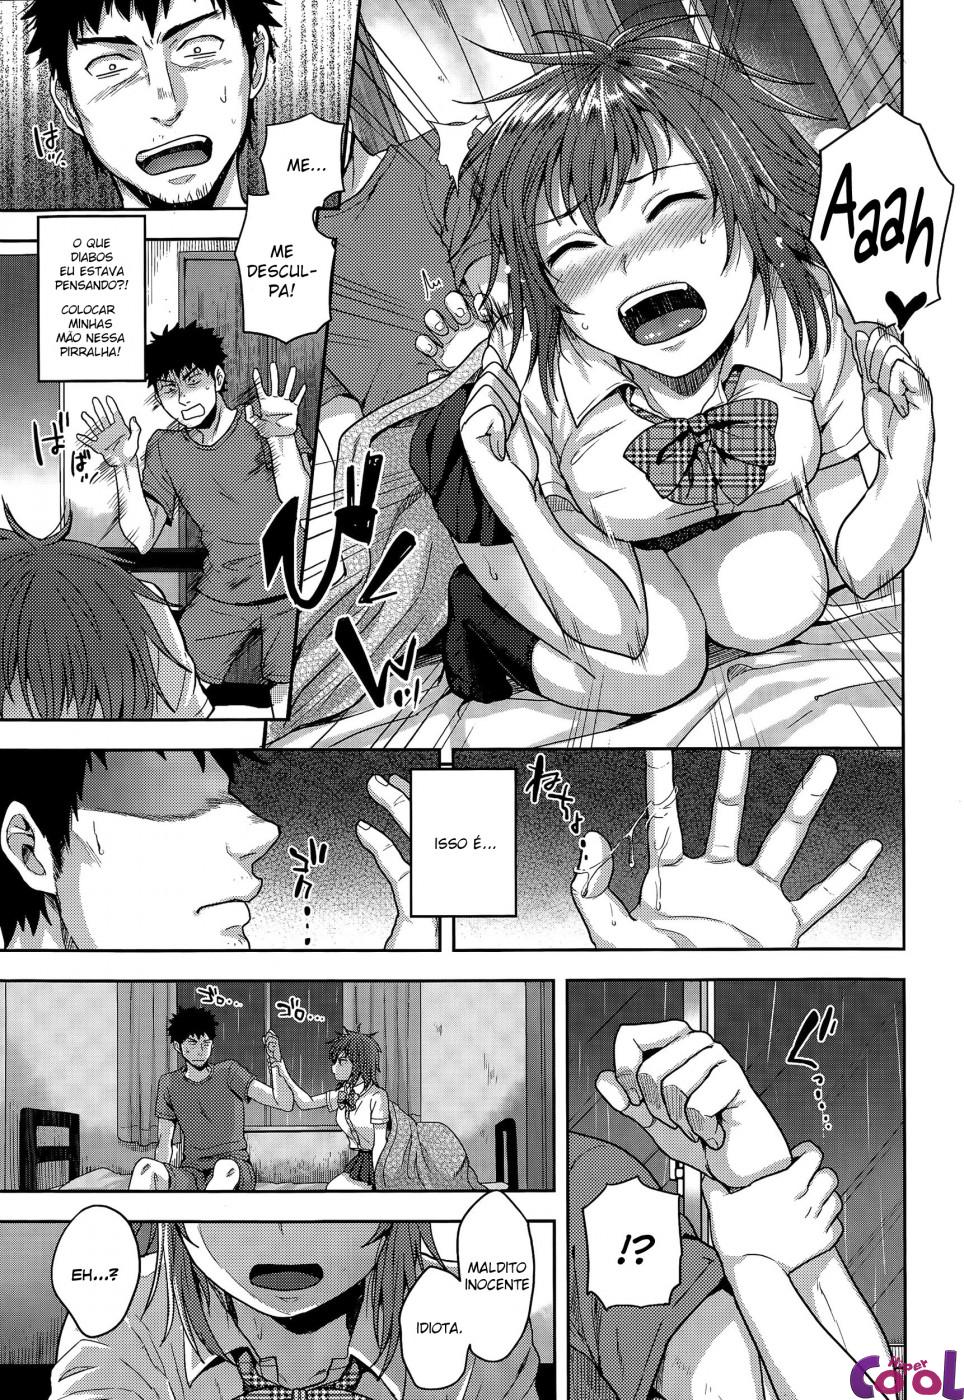 thunder-girl-chapter-01-page-10.jpg